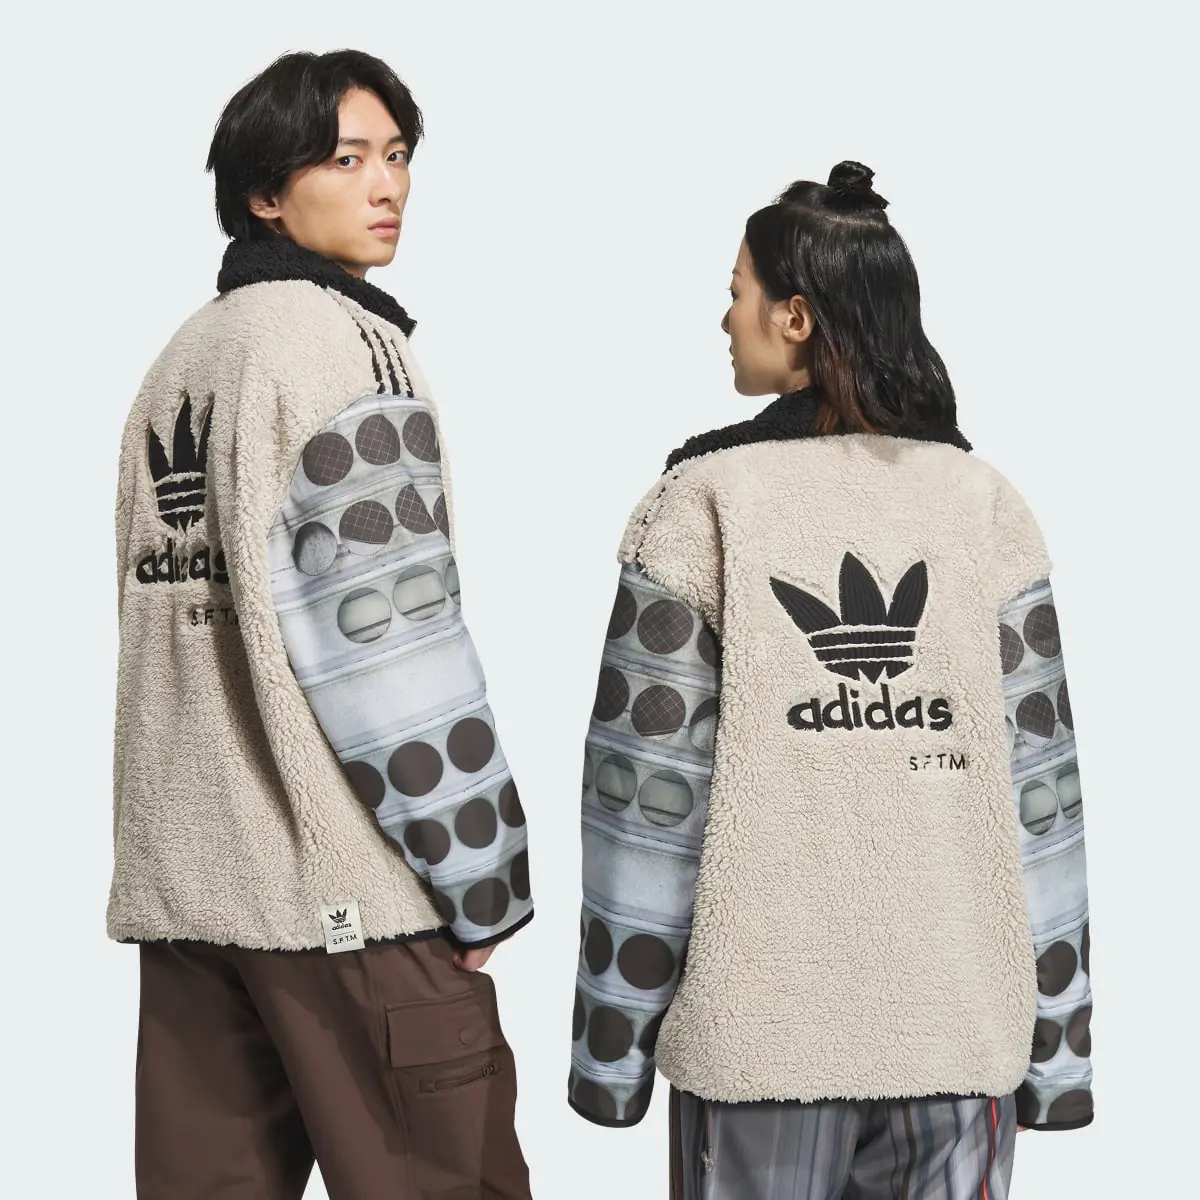 Adidas Bluza Song for the Mute Fleece (Gender Neutral). 2